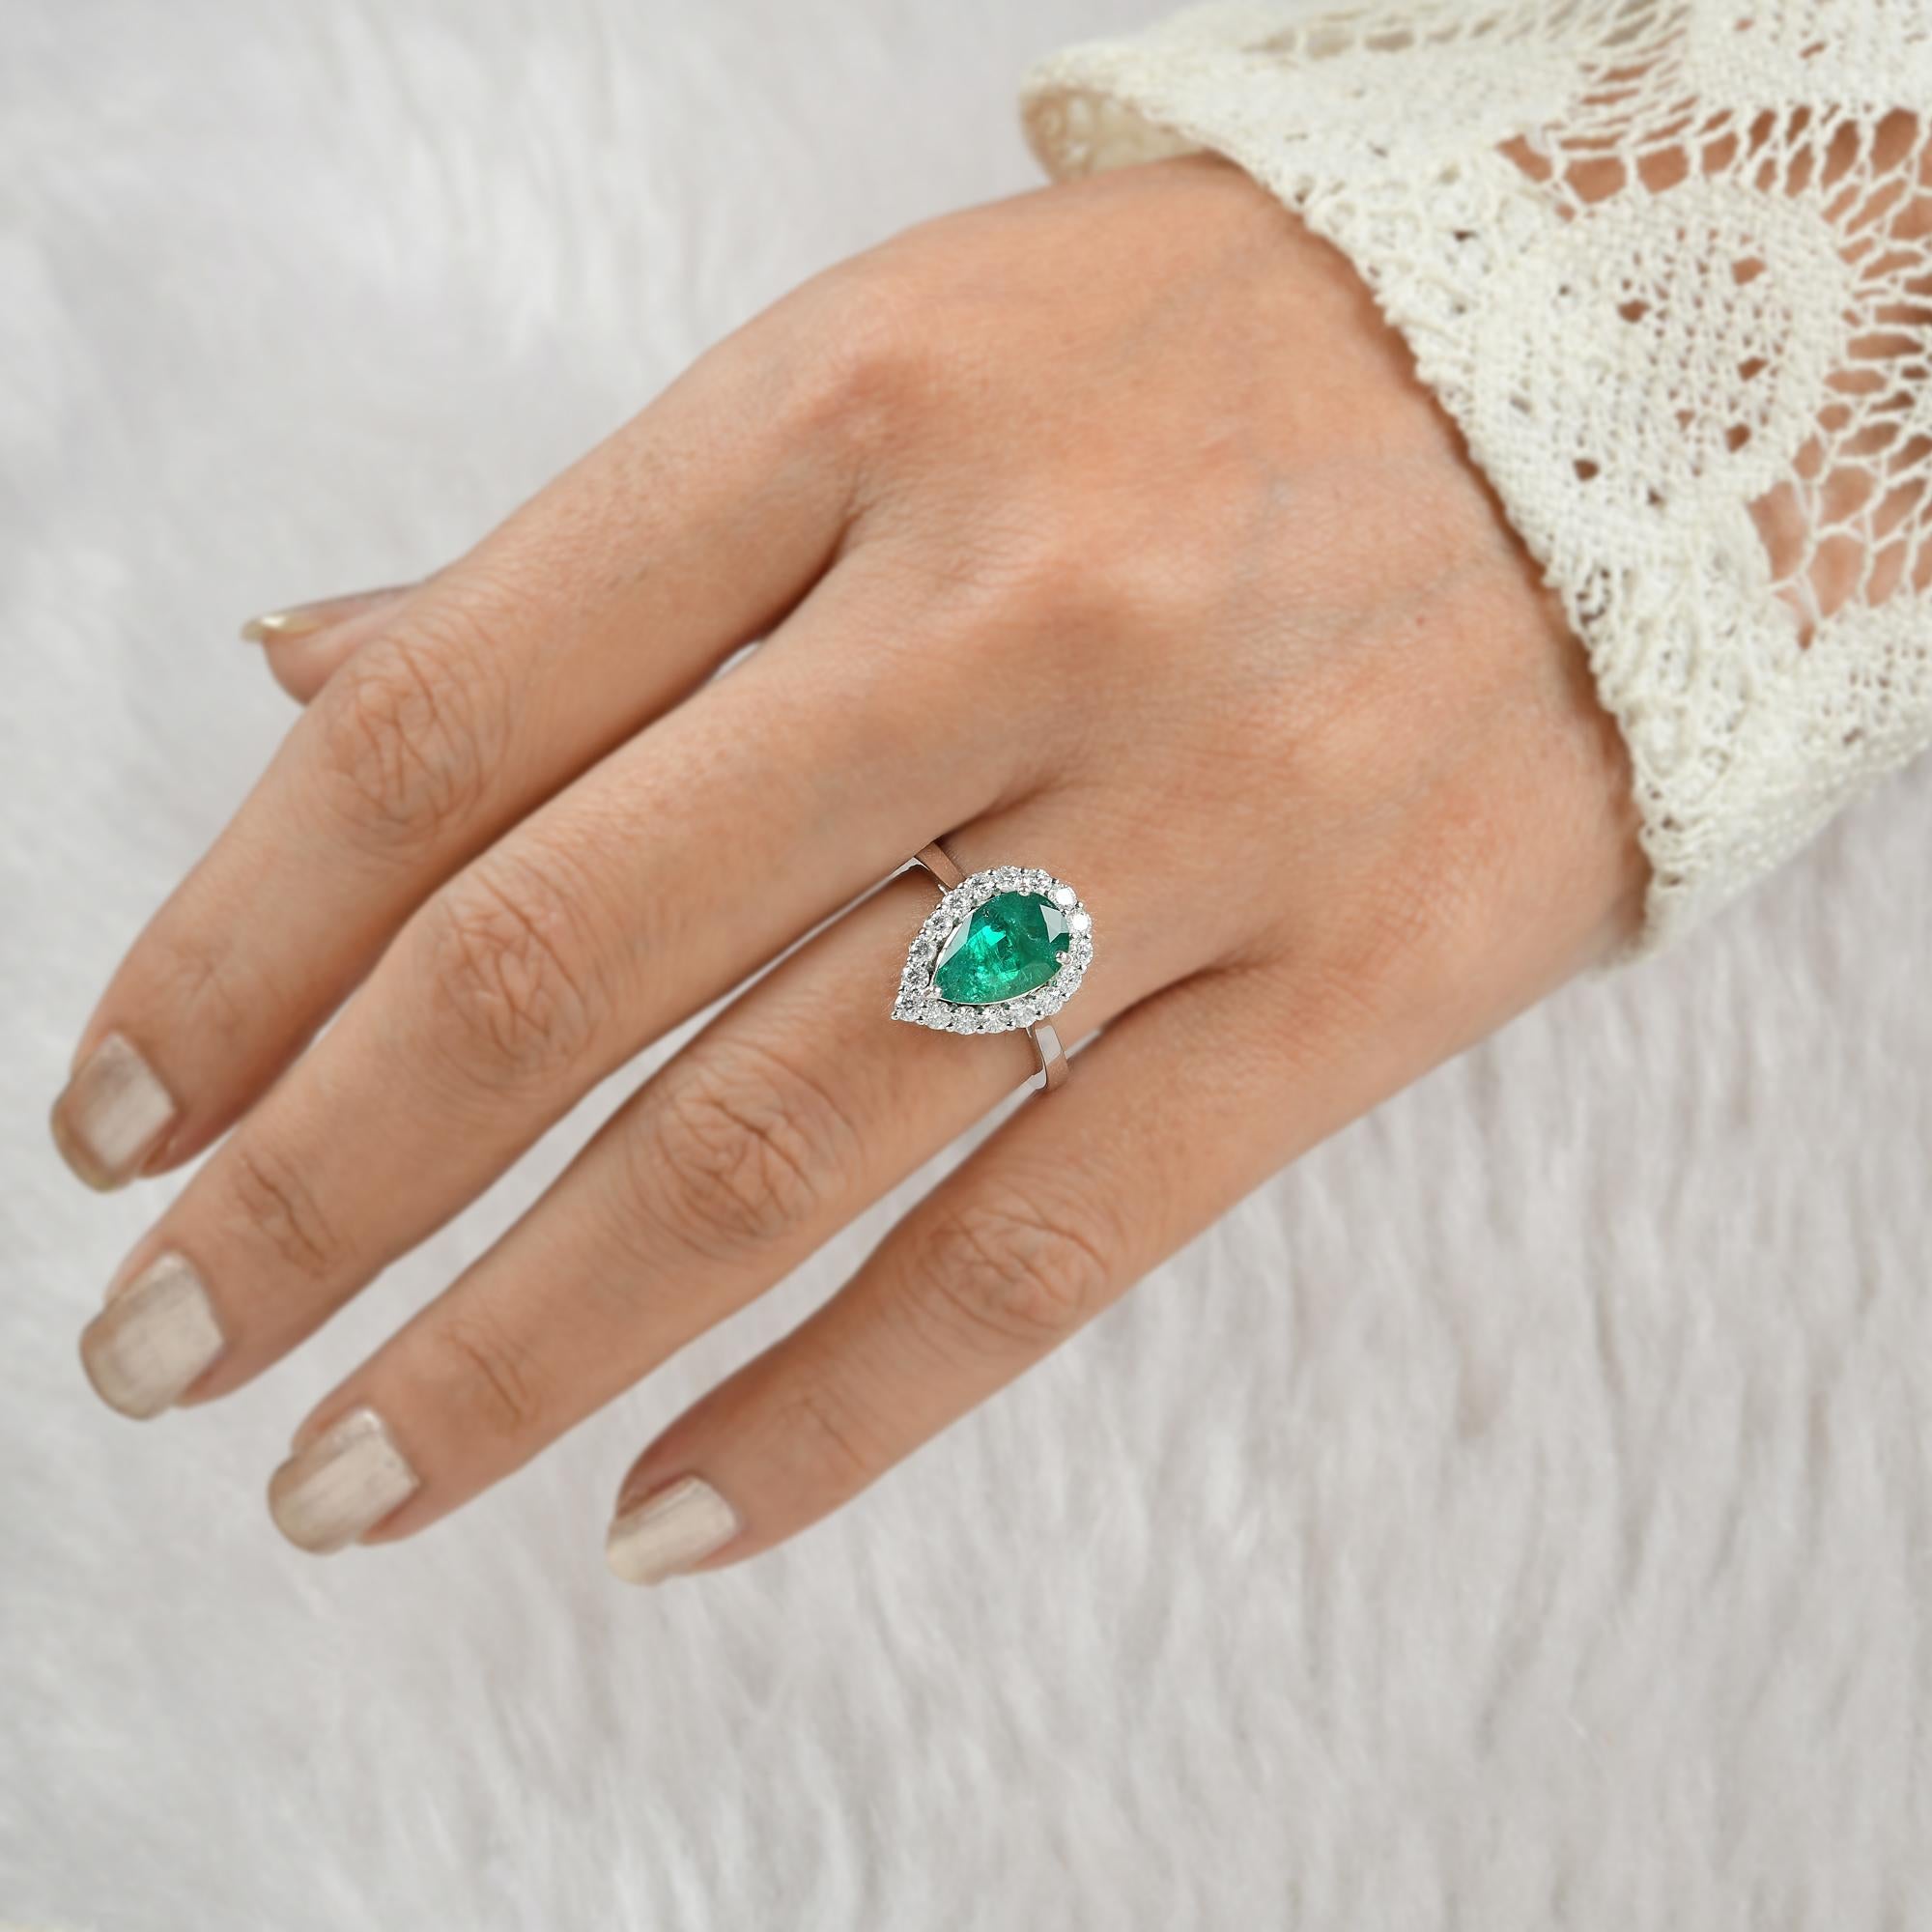 Pear Cut Pear Natural Emerald Gemstone Cocktail Ring Diamond 18 Karat White Gold Jewelry For Sale